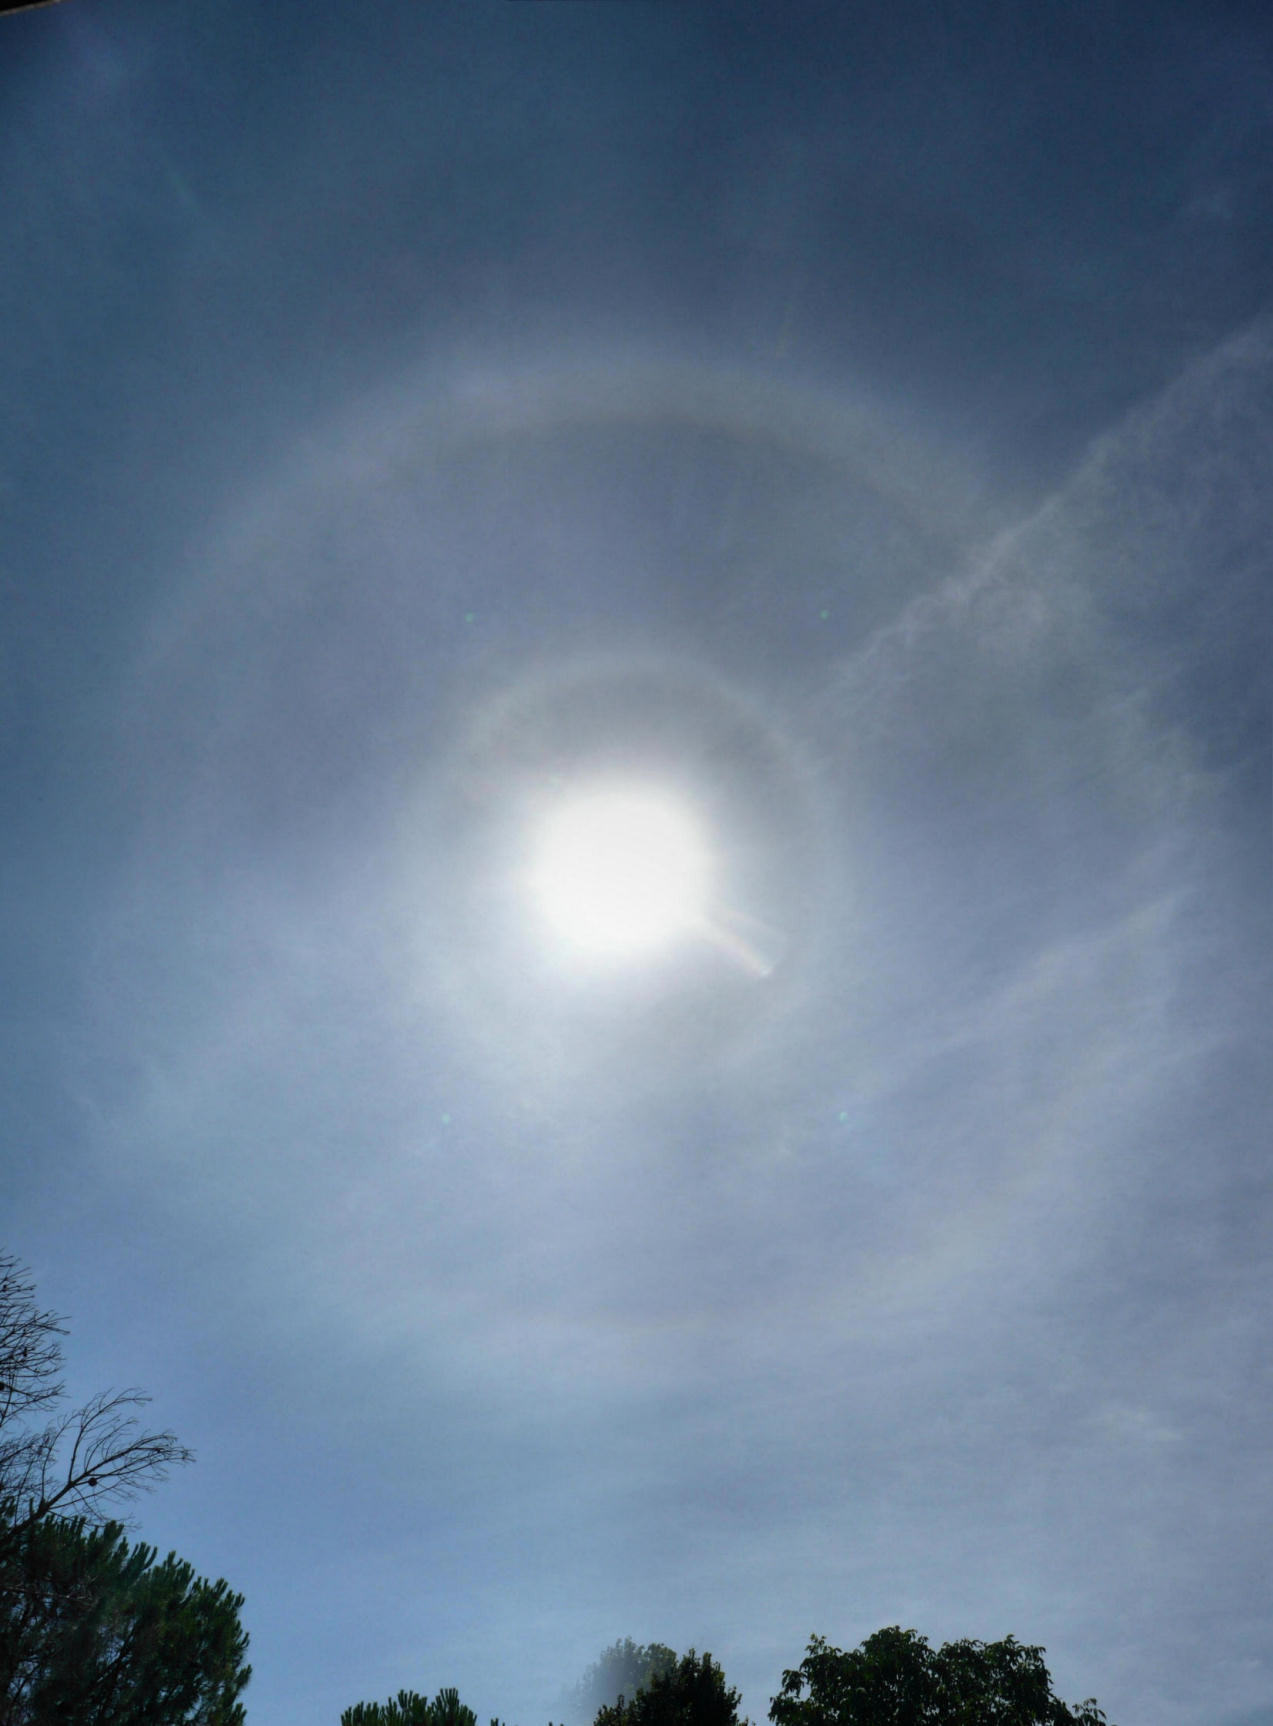 Solar Halos: 141 KB; click on the image to enlarge at 1273x1726 pixels